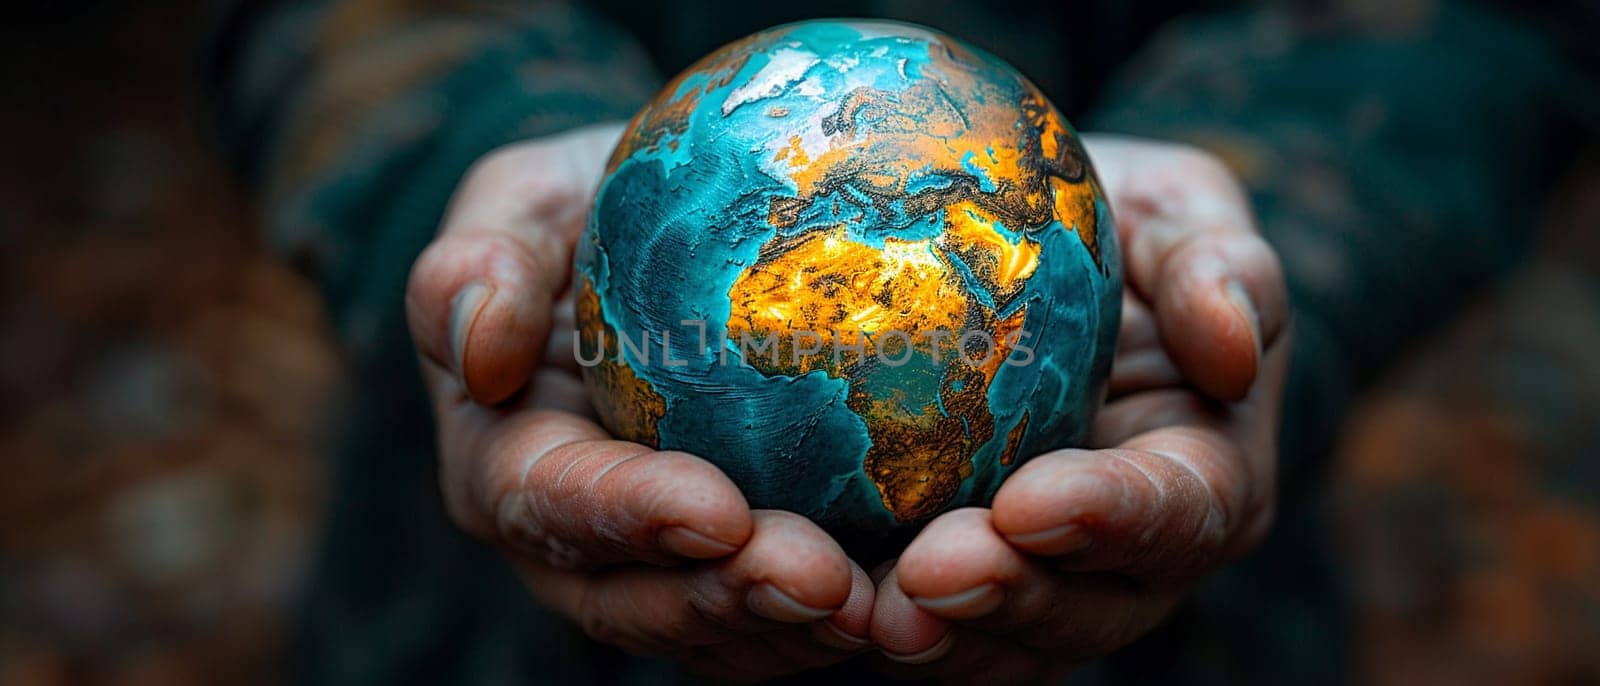 Fingers turning a globe, showcasing travel, global awareness, and exploration.